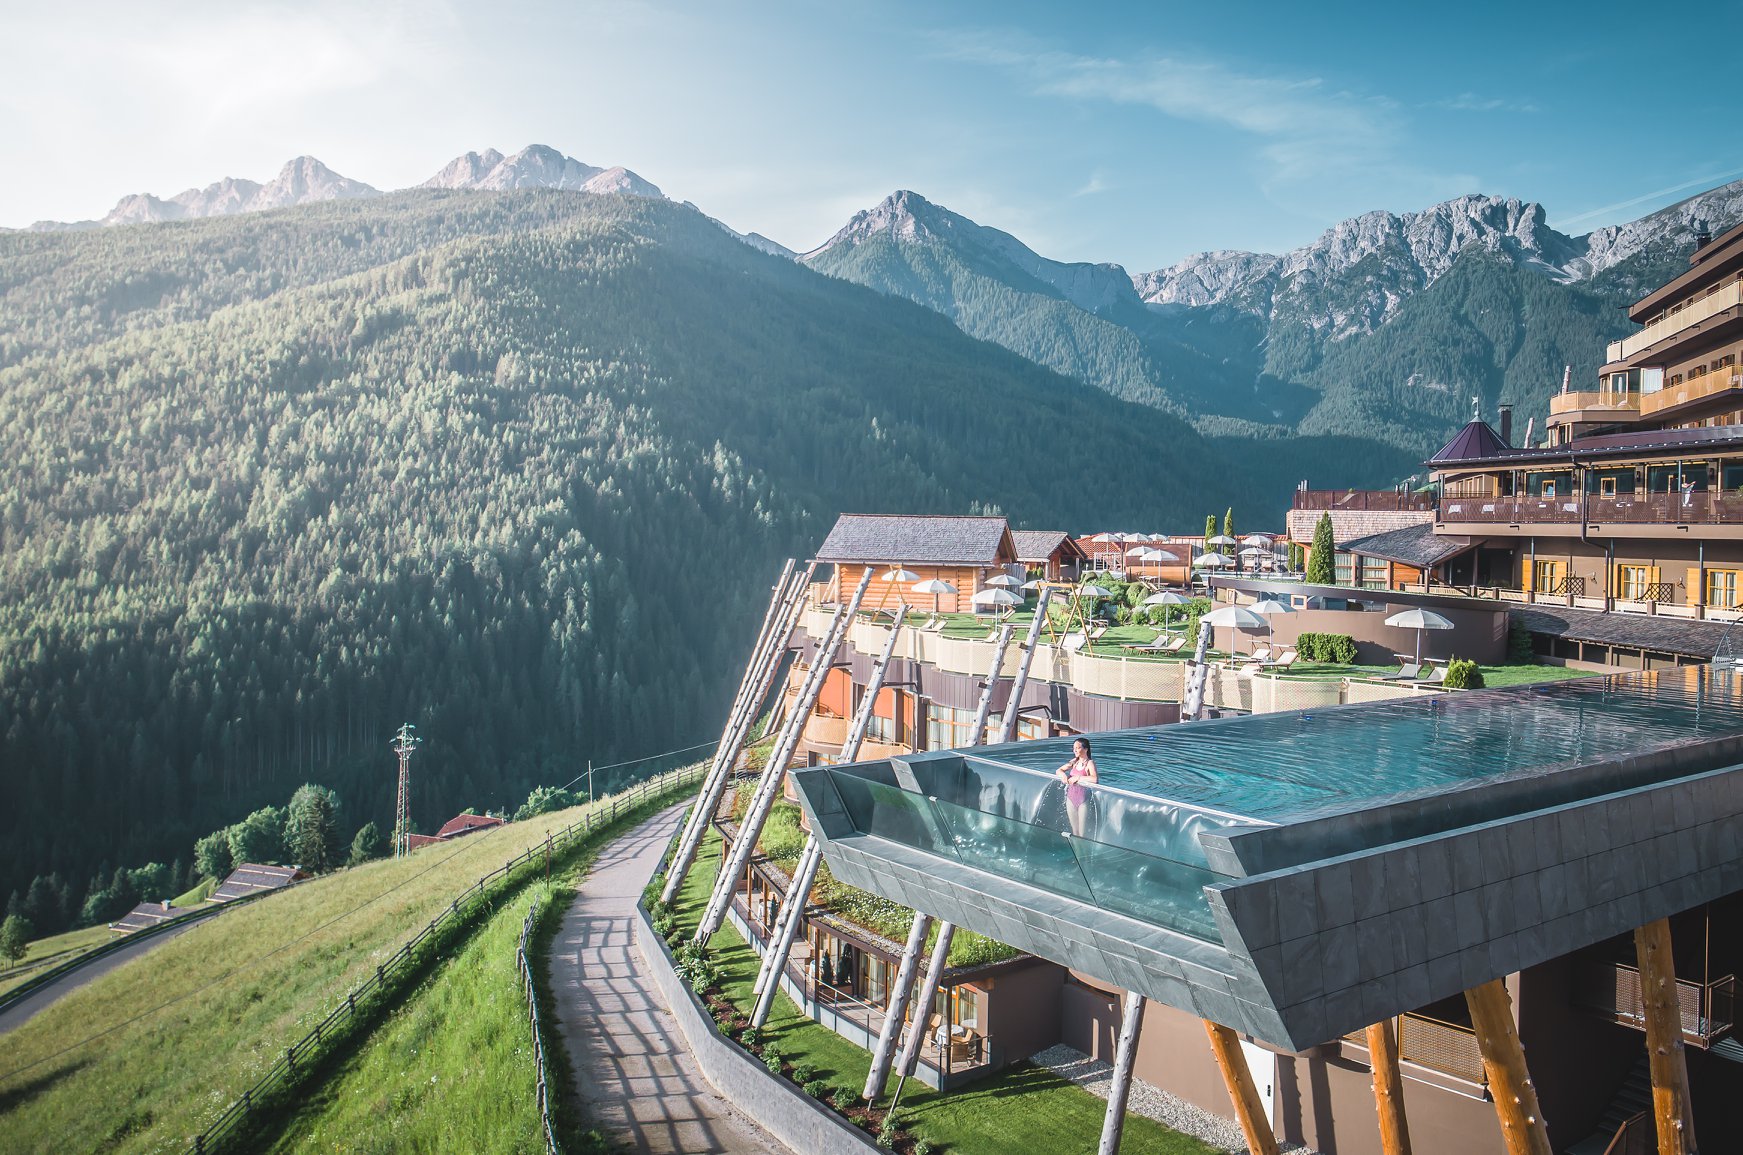 Sky Pool at the Alpin Panorama Hotel Hubertus in Italy - one of the incredible infinity pools in the world